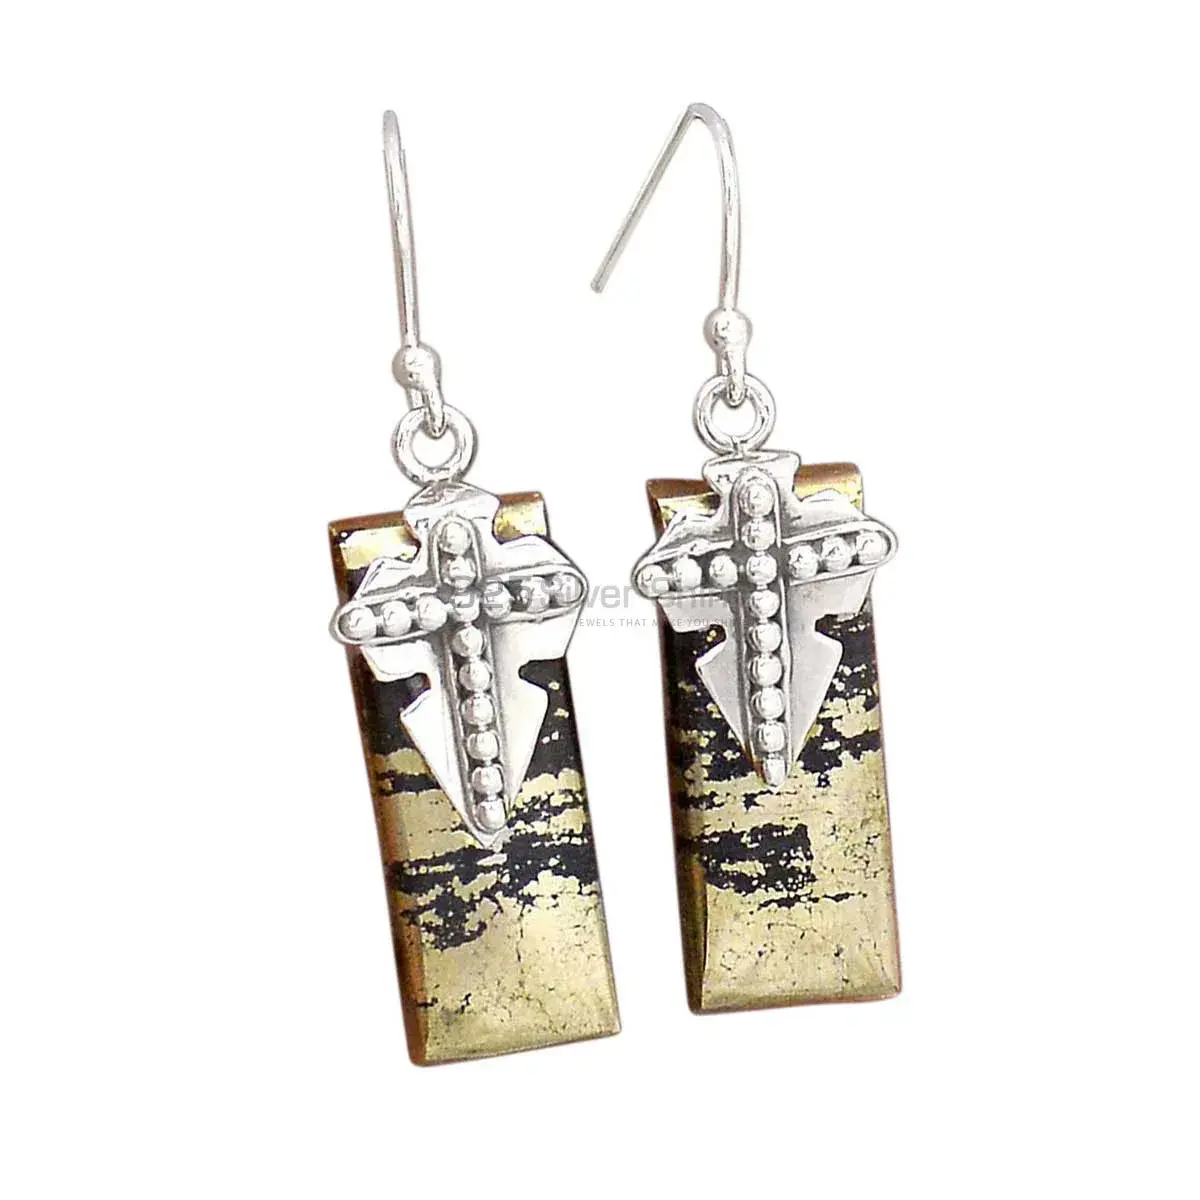 Top Quality 925 Sterling Silver Earrings In Golden Pyrite Gemstone Jewelry 925SE2614